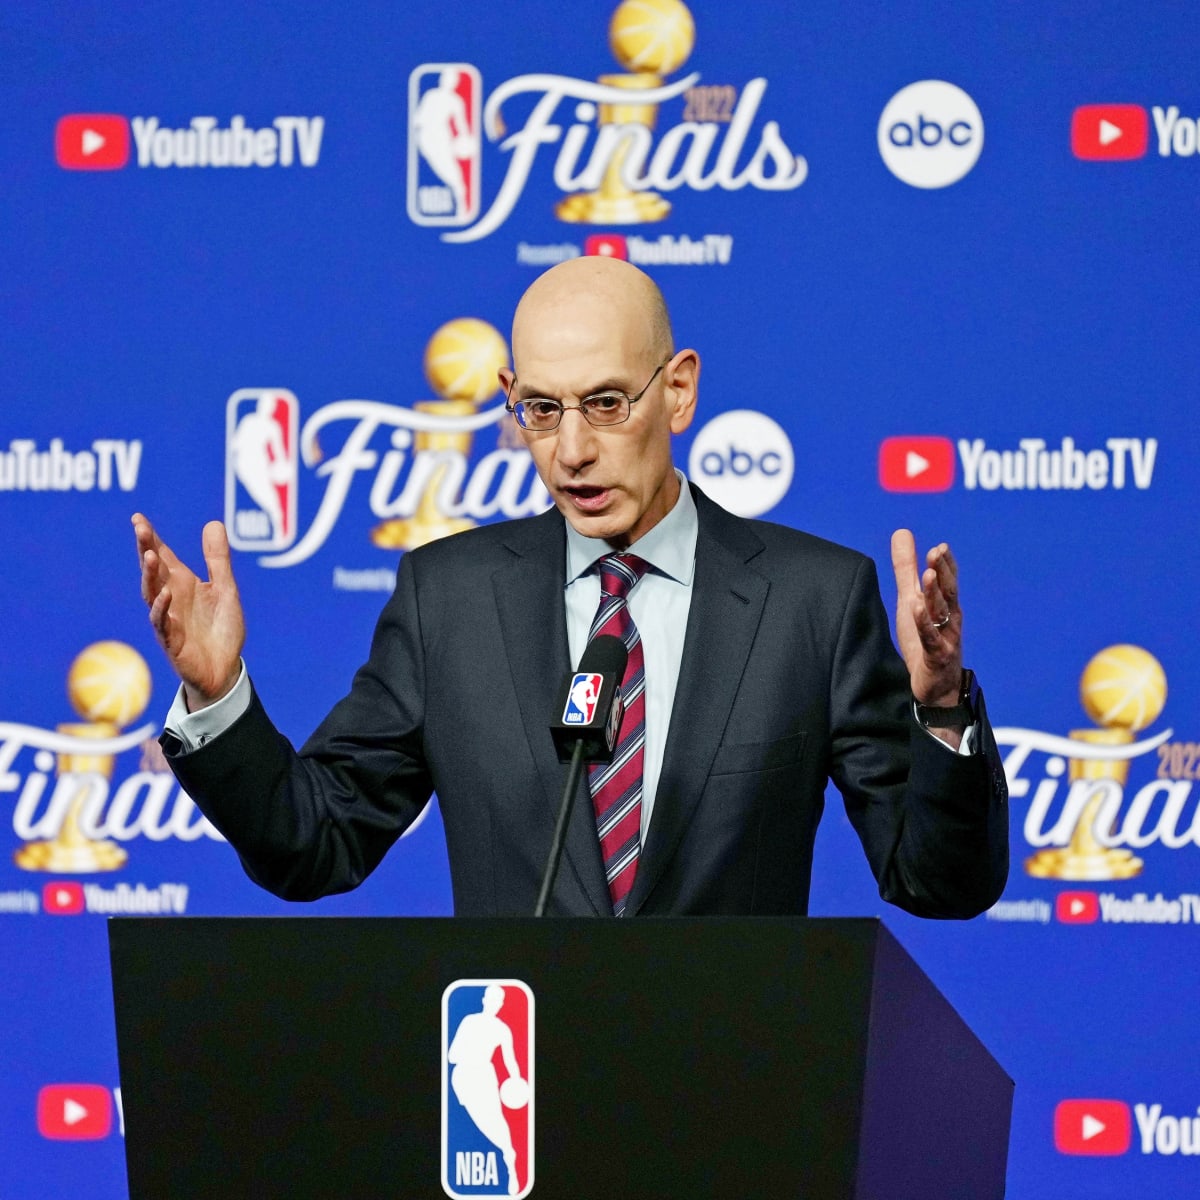 Potential Sonics expansion questions loom with brief NBA Seattle